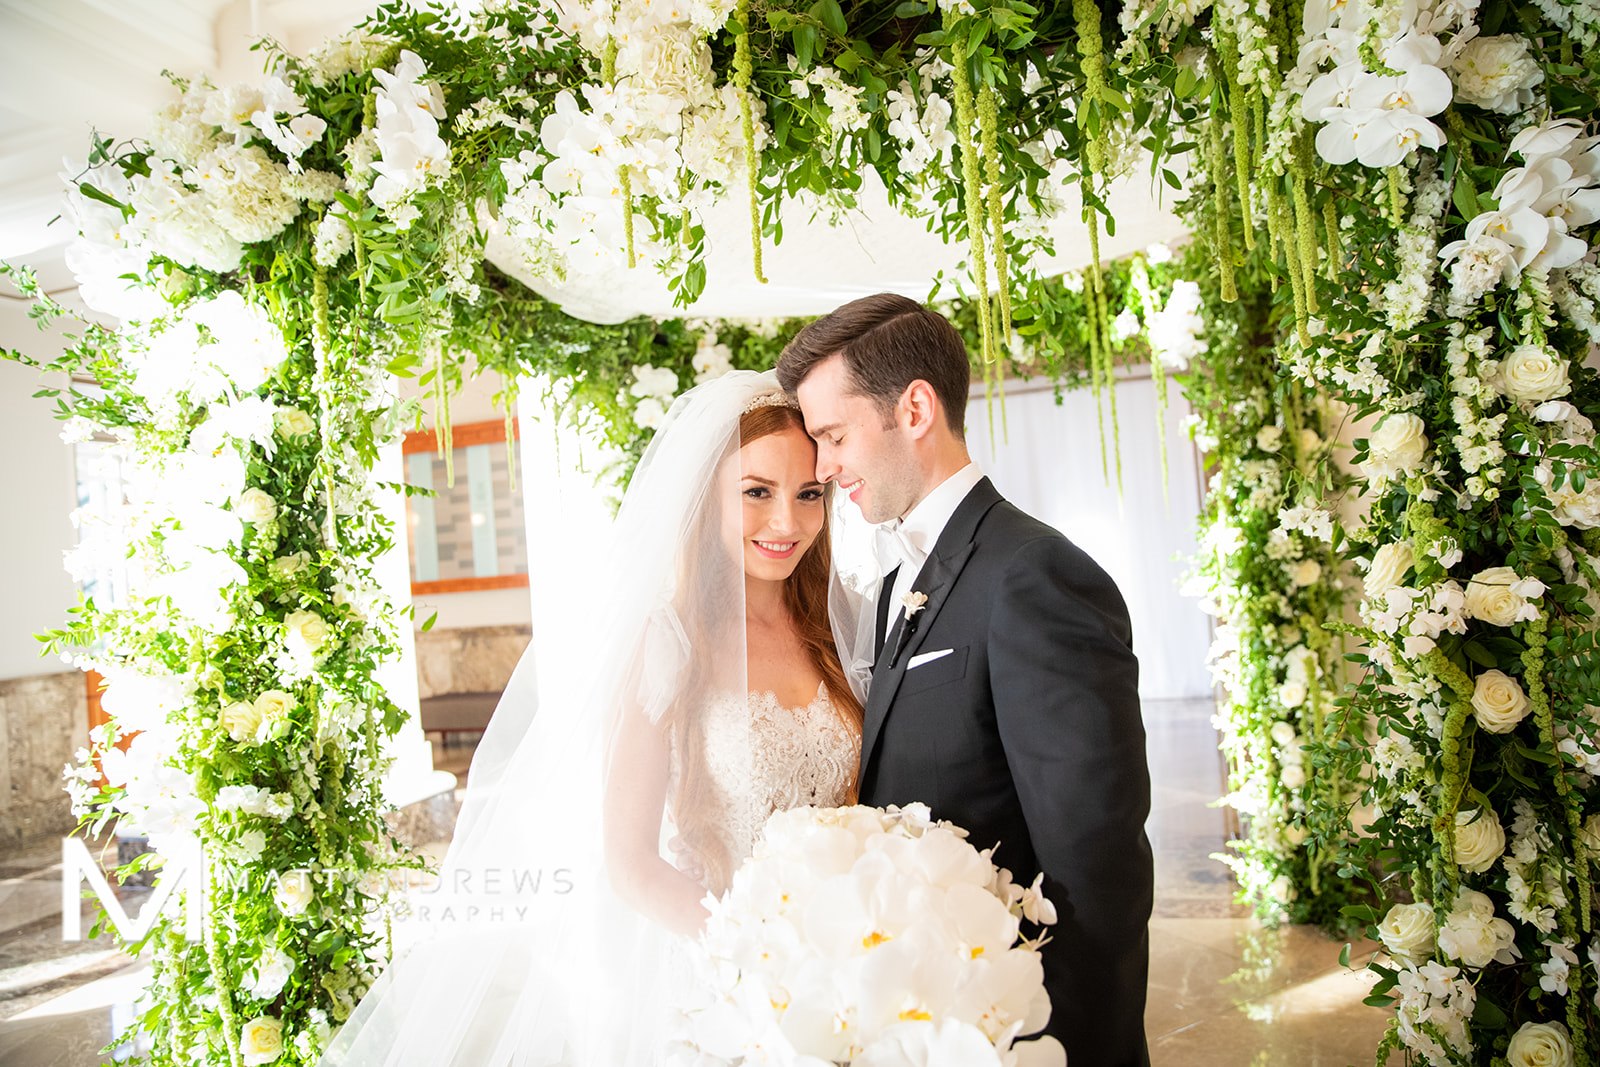 Matt Andrews Photography: Floral Filled Luxurious Wedding by LMA Designs featured on Nashville Bride Guide